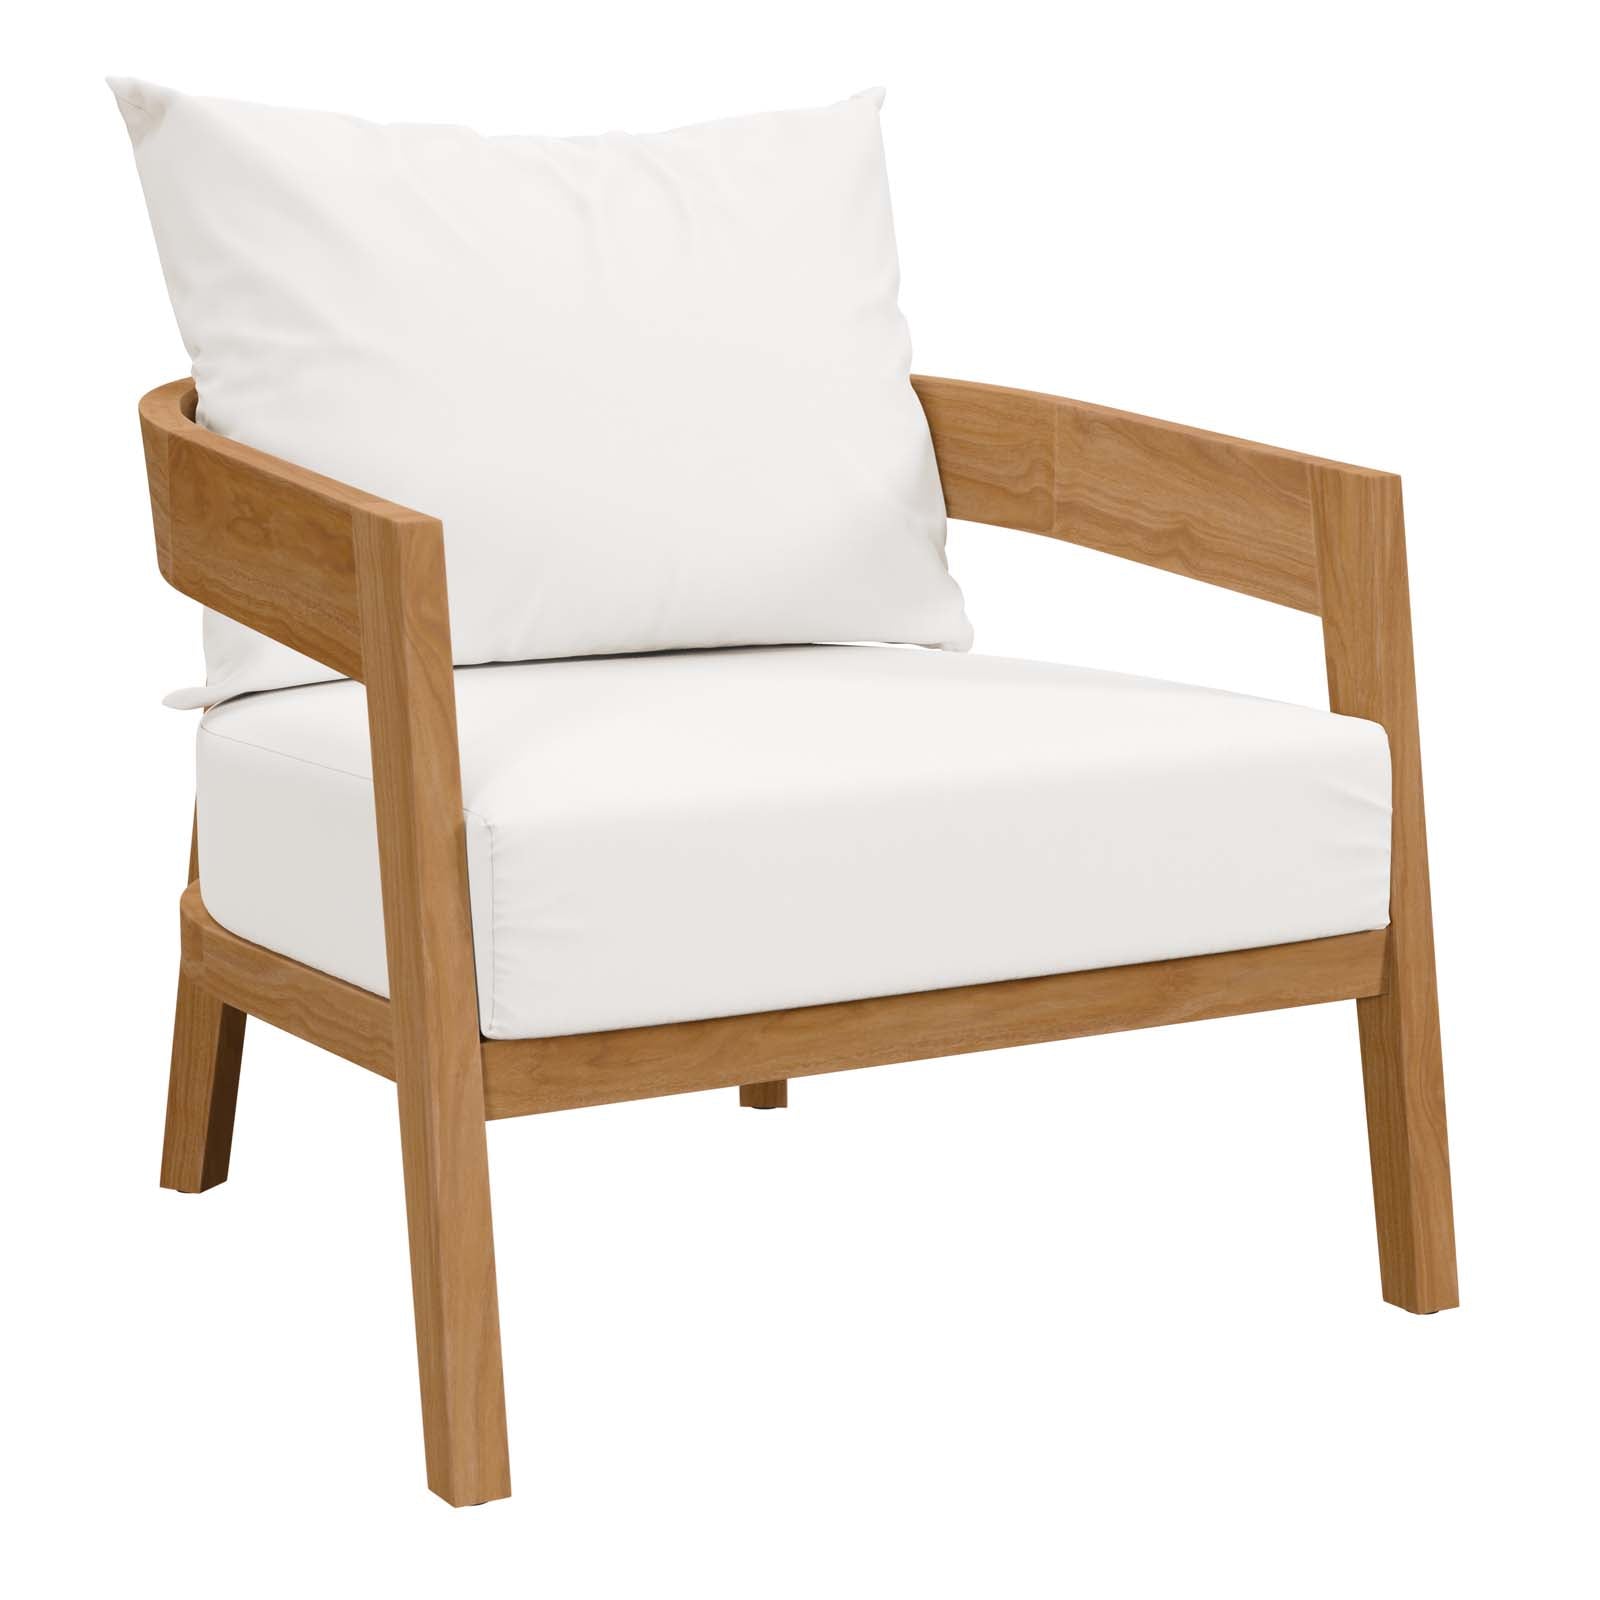 Modway Outdoor Chairs - Brisbane Teak Wood Outdoor Patio Armchair Natural White